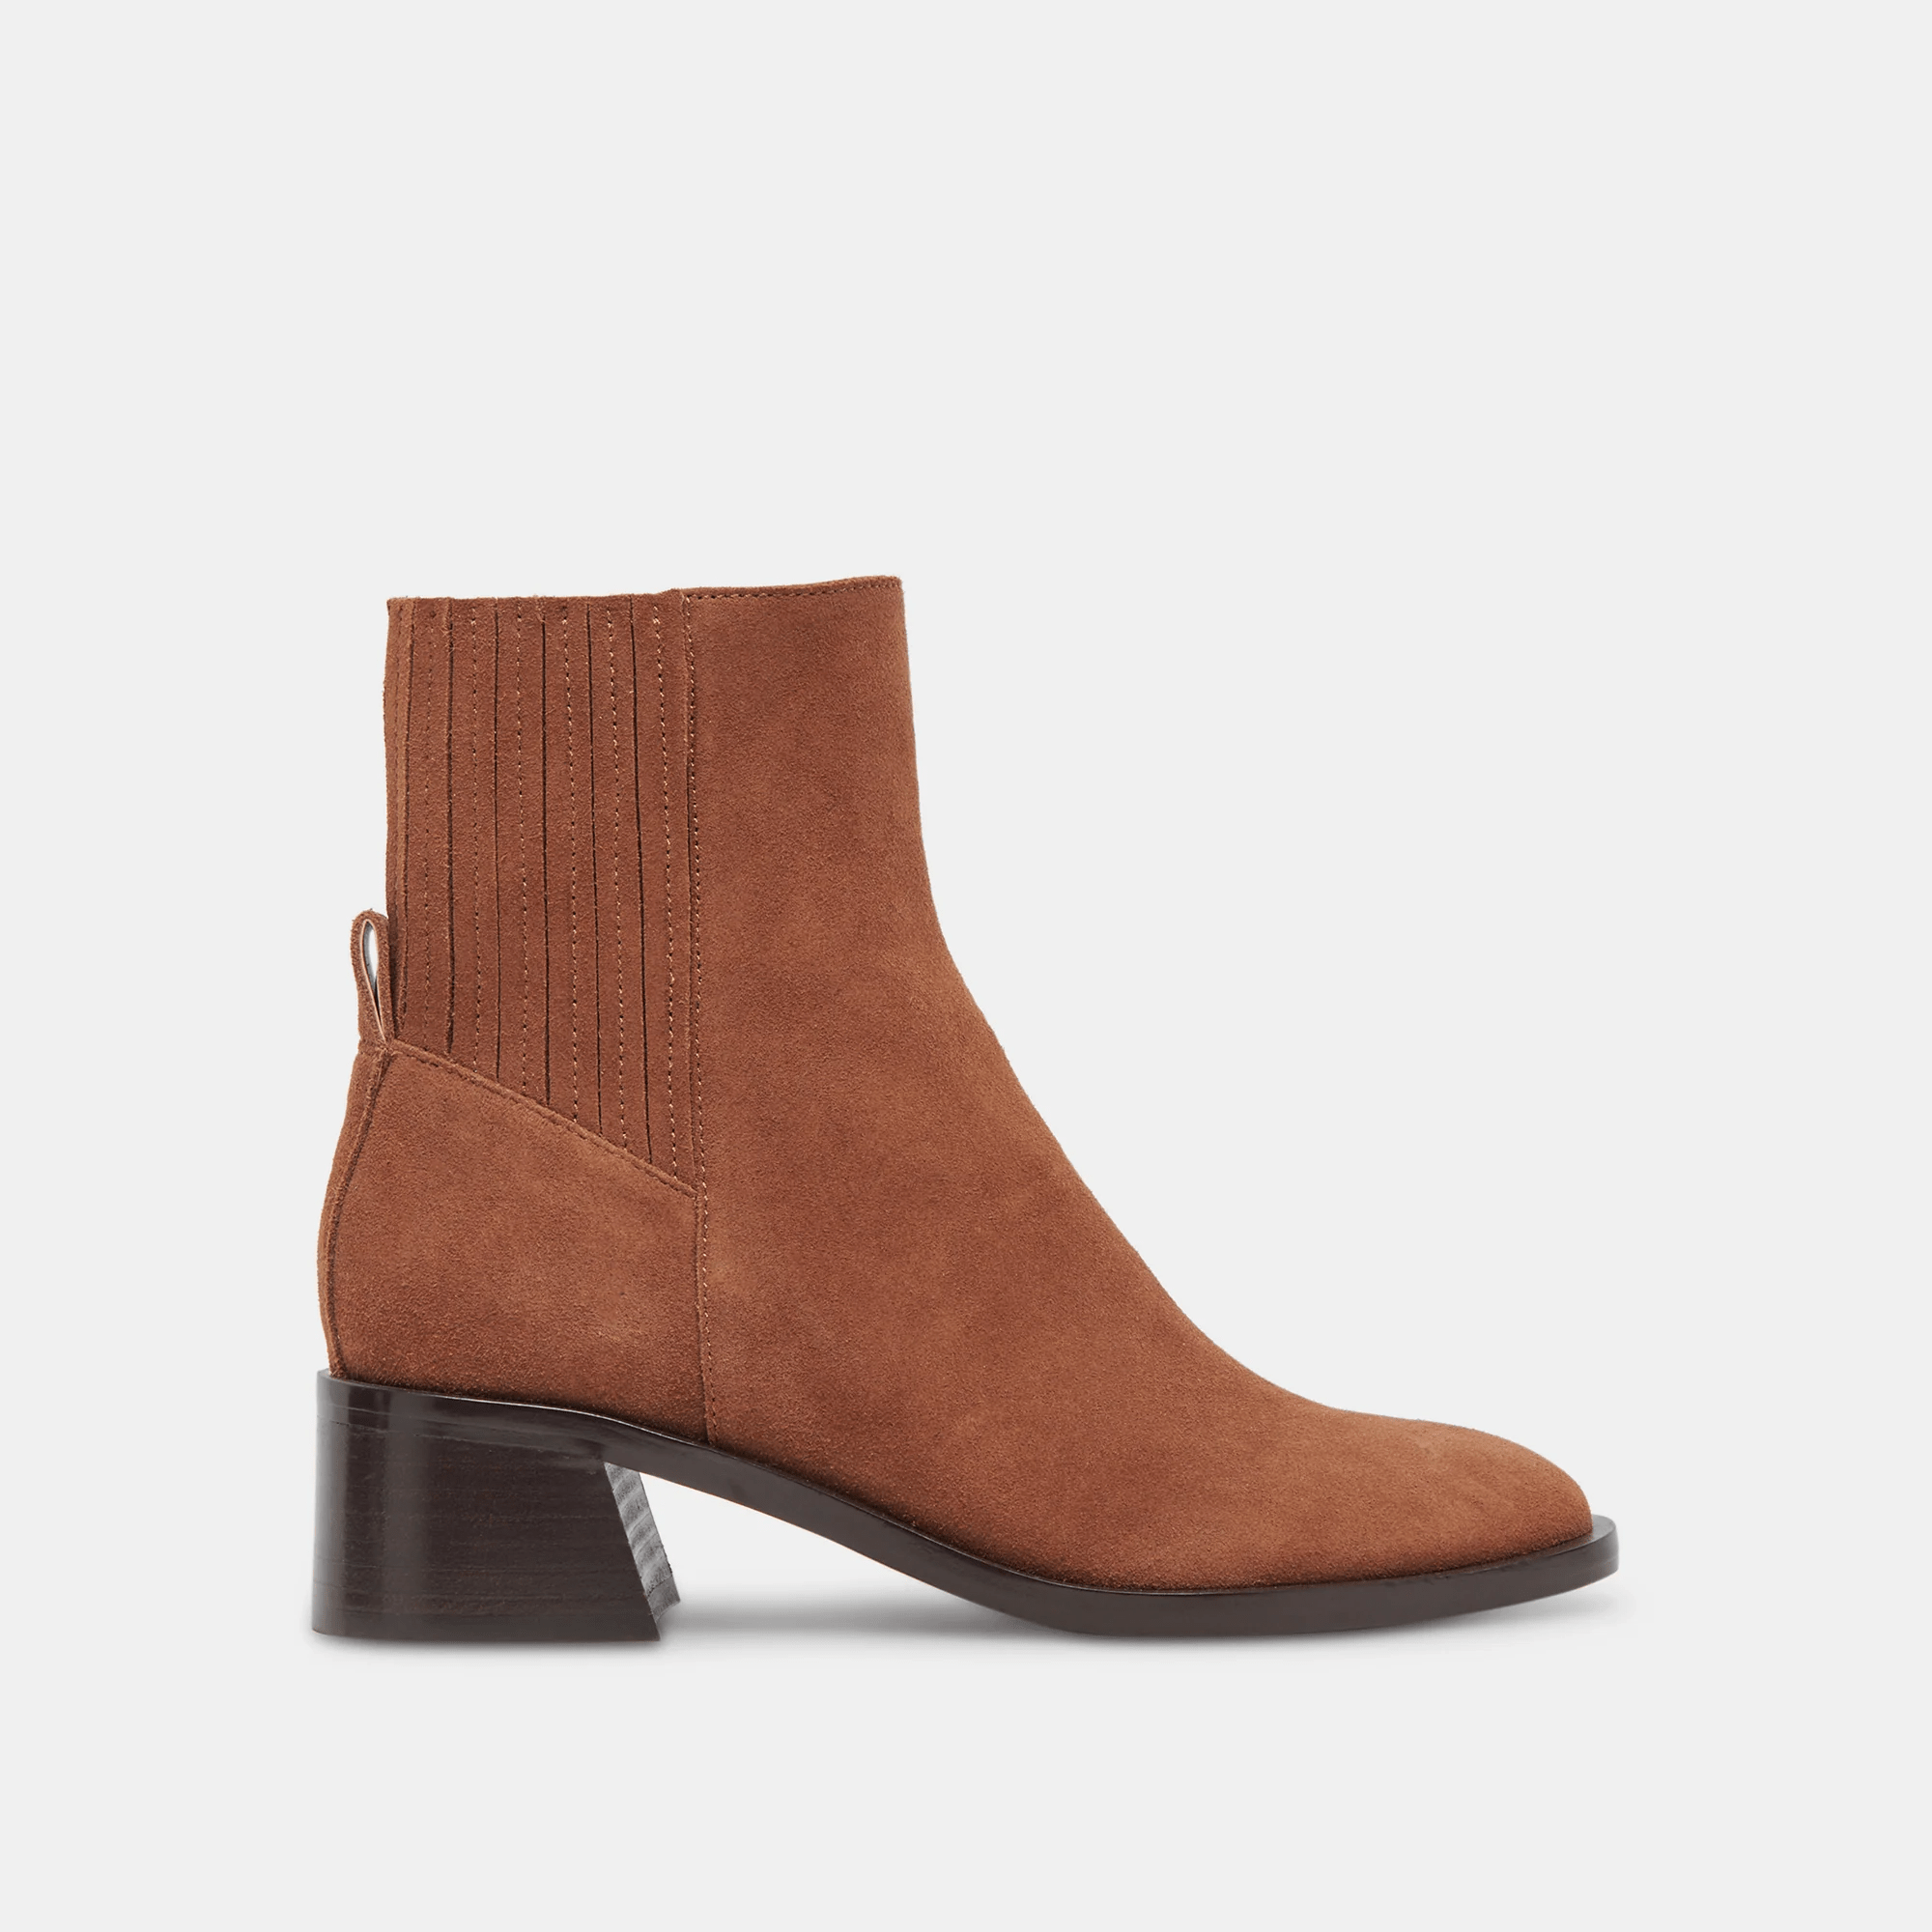 Linny H2O Brown Suede Bootie with All Season Protection -Dolce Vita Footwear, Inc.- Ruby Jane-